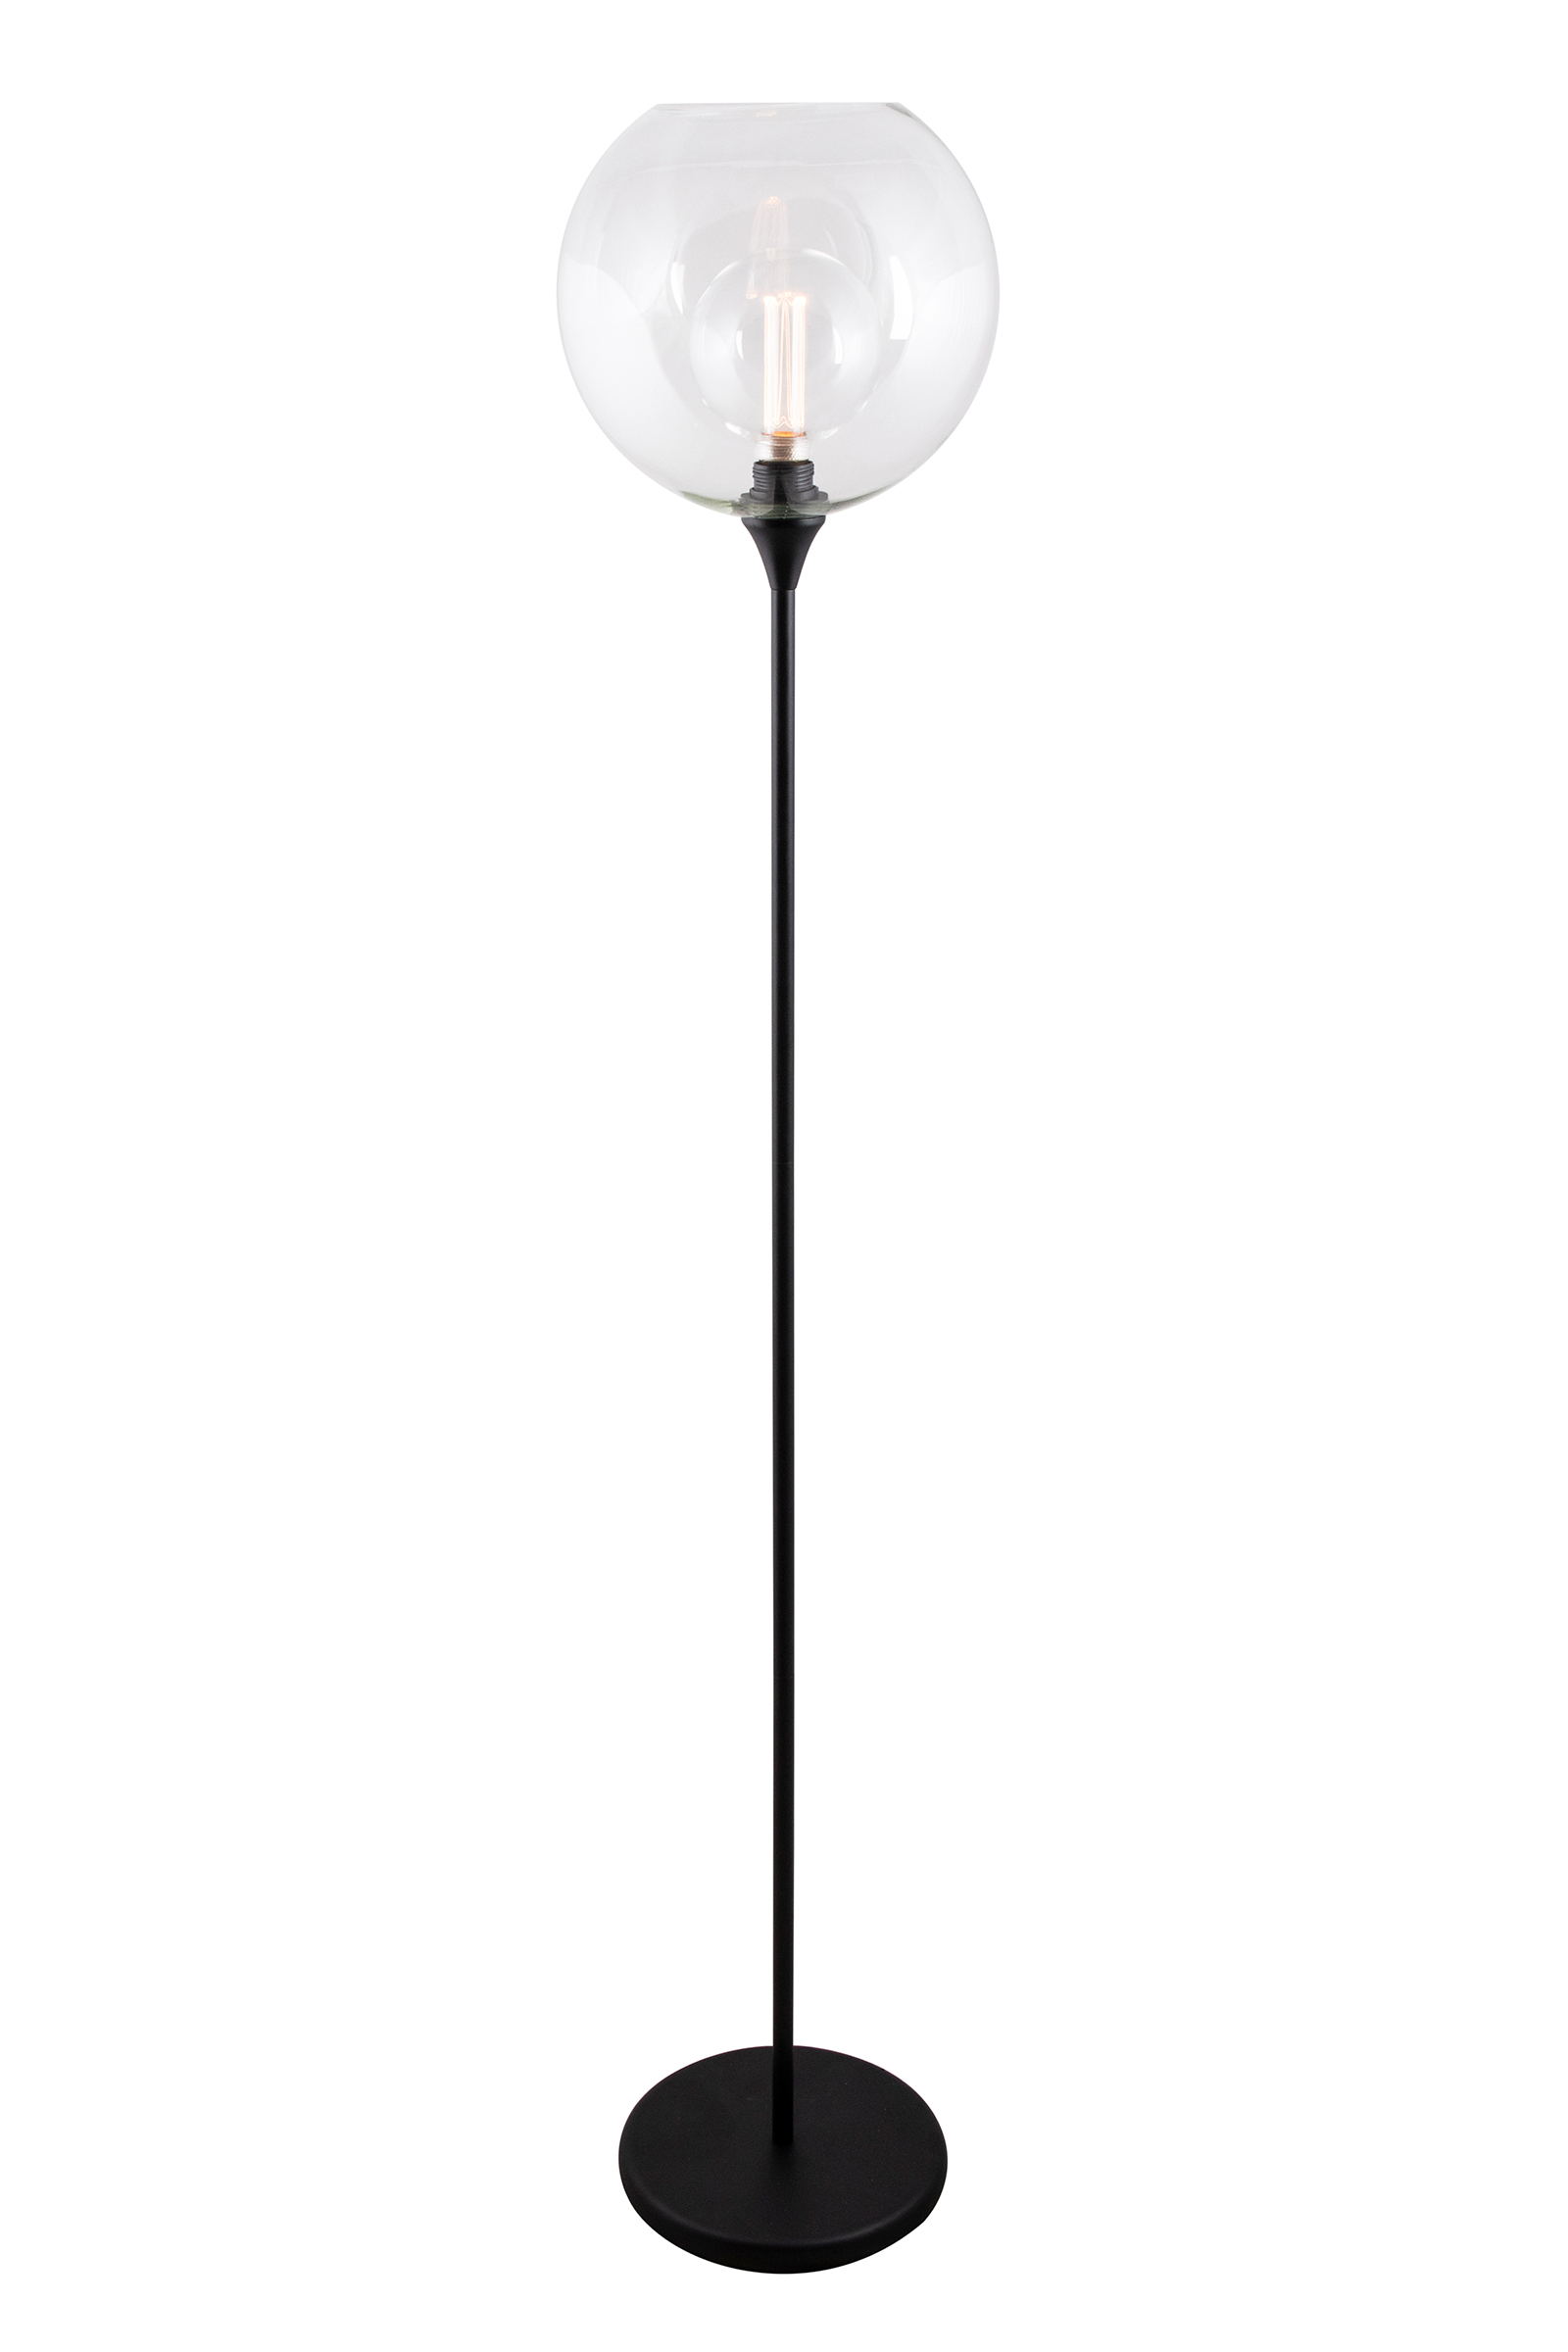 Floor Lamp Bowl Simple Clean Floor Lamp With Bowl In Clear Glass And Base In Matt Black Metal The Lamp Has A 200 Cm Long Transparent Cable With in proportions 1600 X 2400